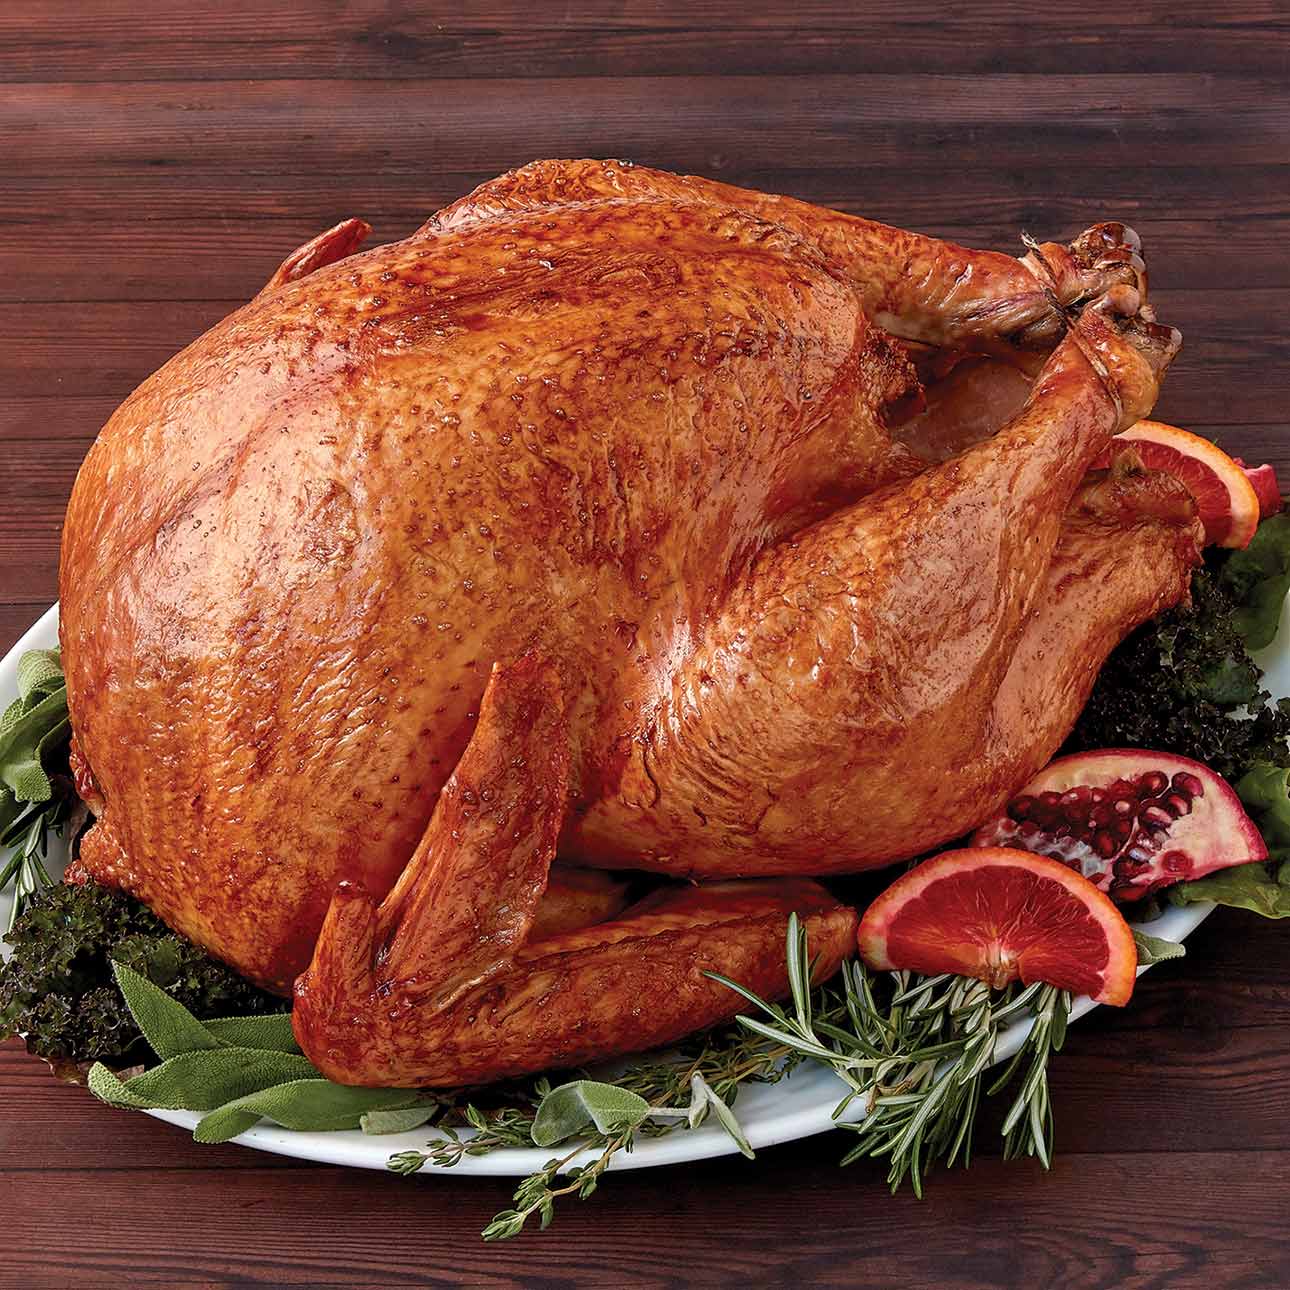 Deluxe Whole Roasted Turkey Meal Dierbergs Markets